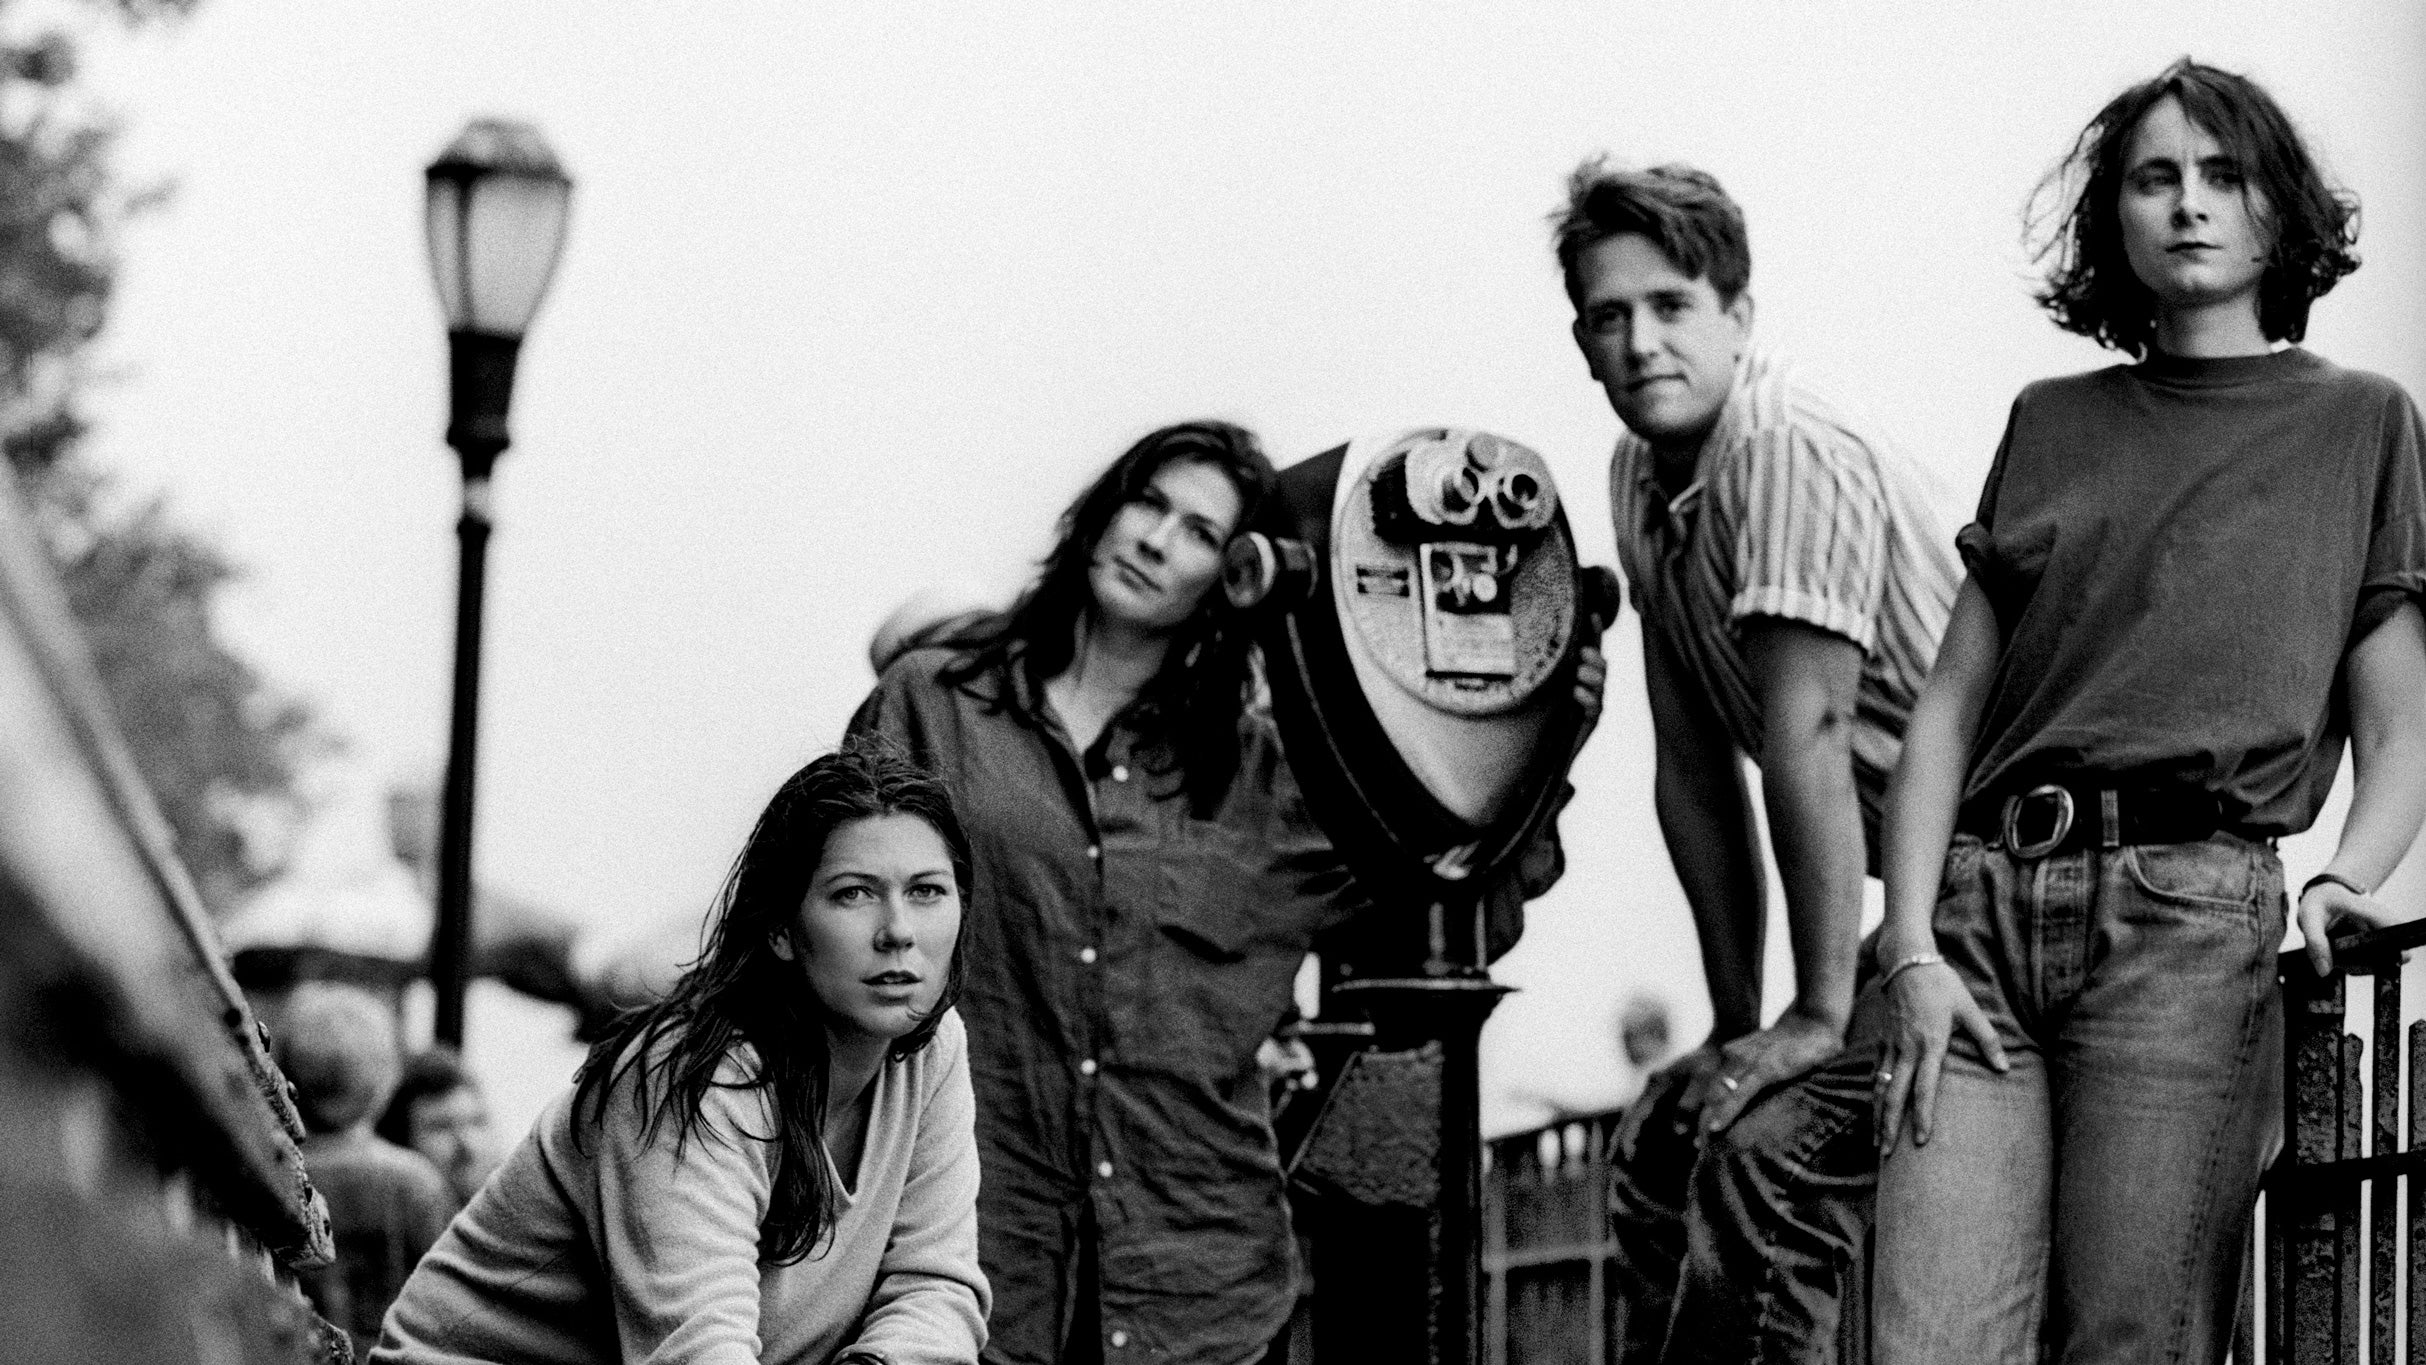 The Breeders free presale password for early tickets in Philadelphia